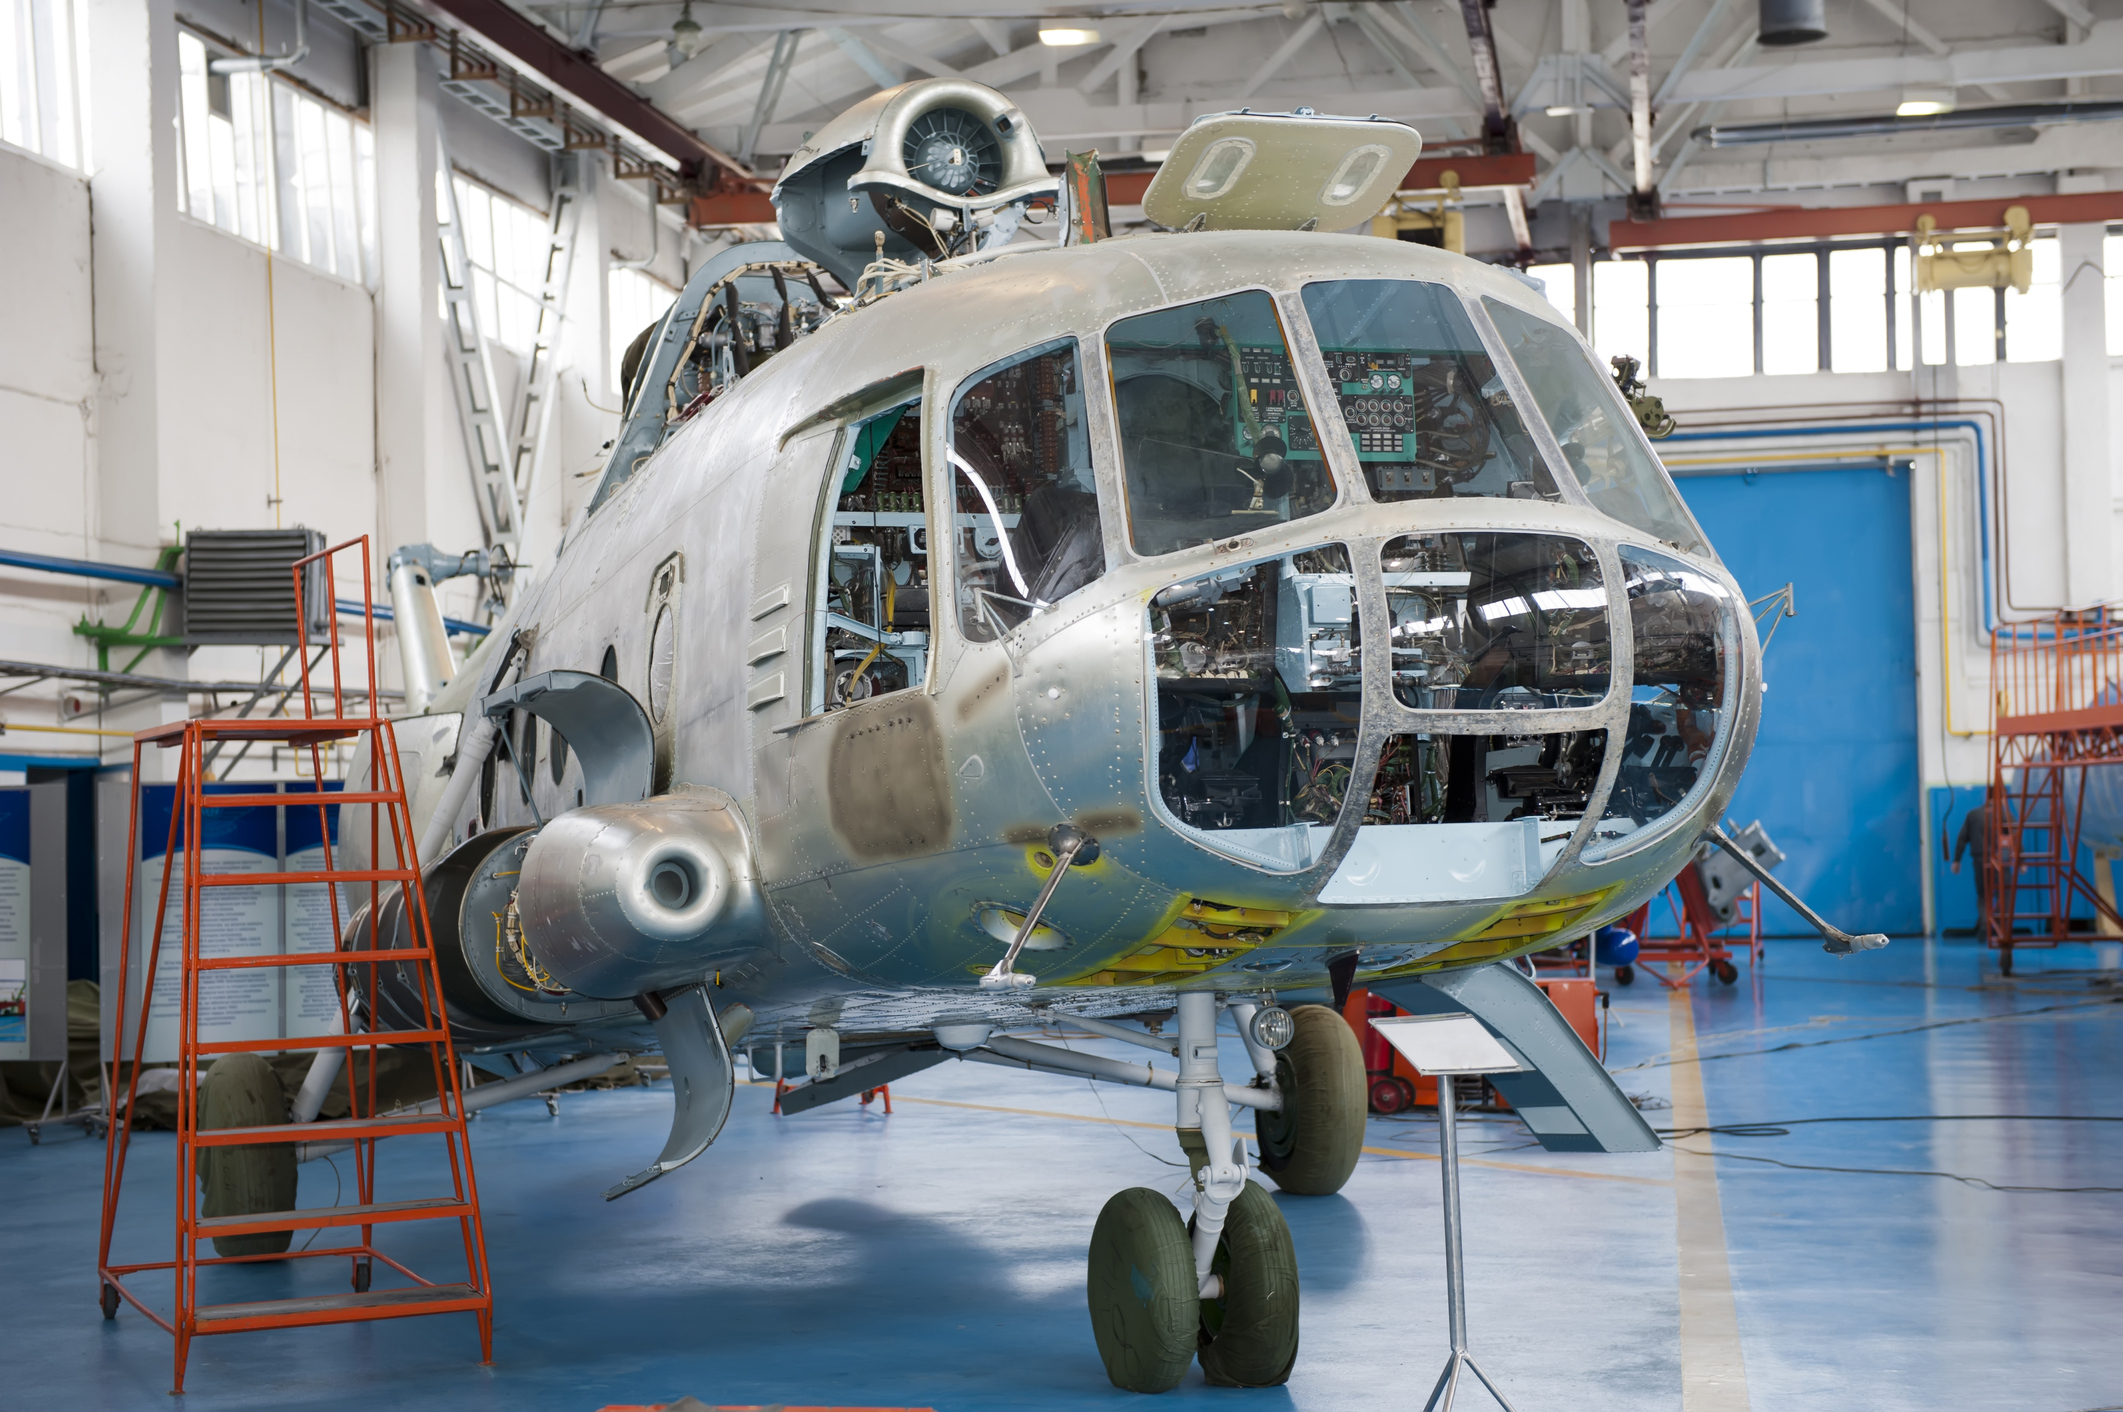 Repair of helicopters